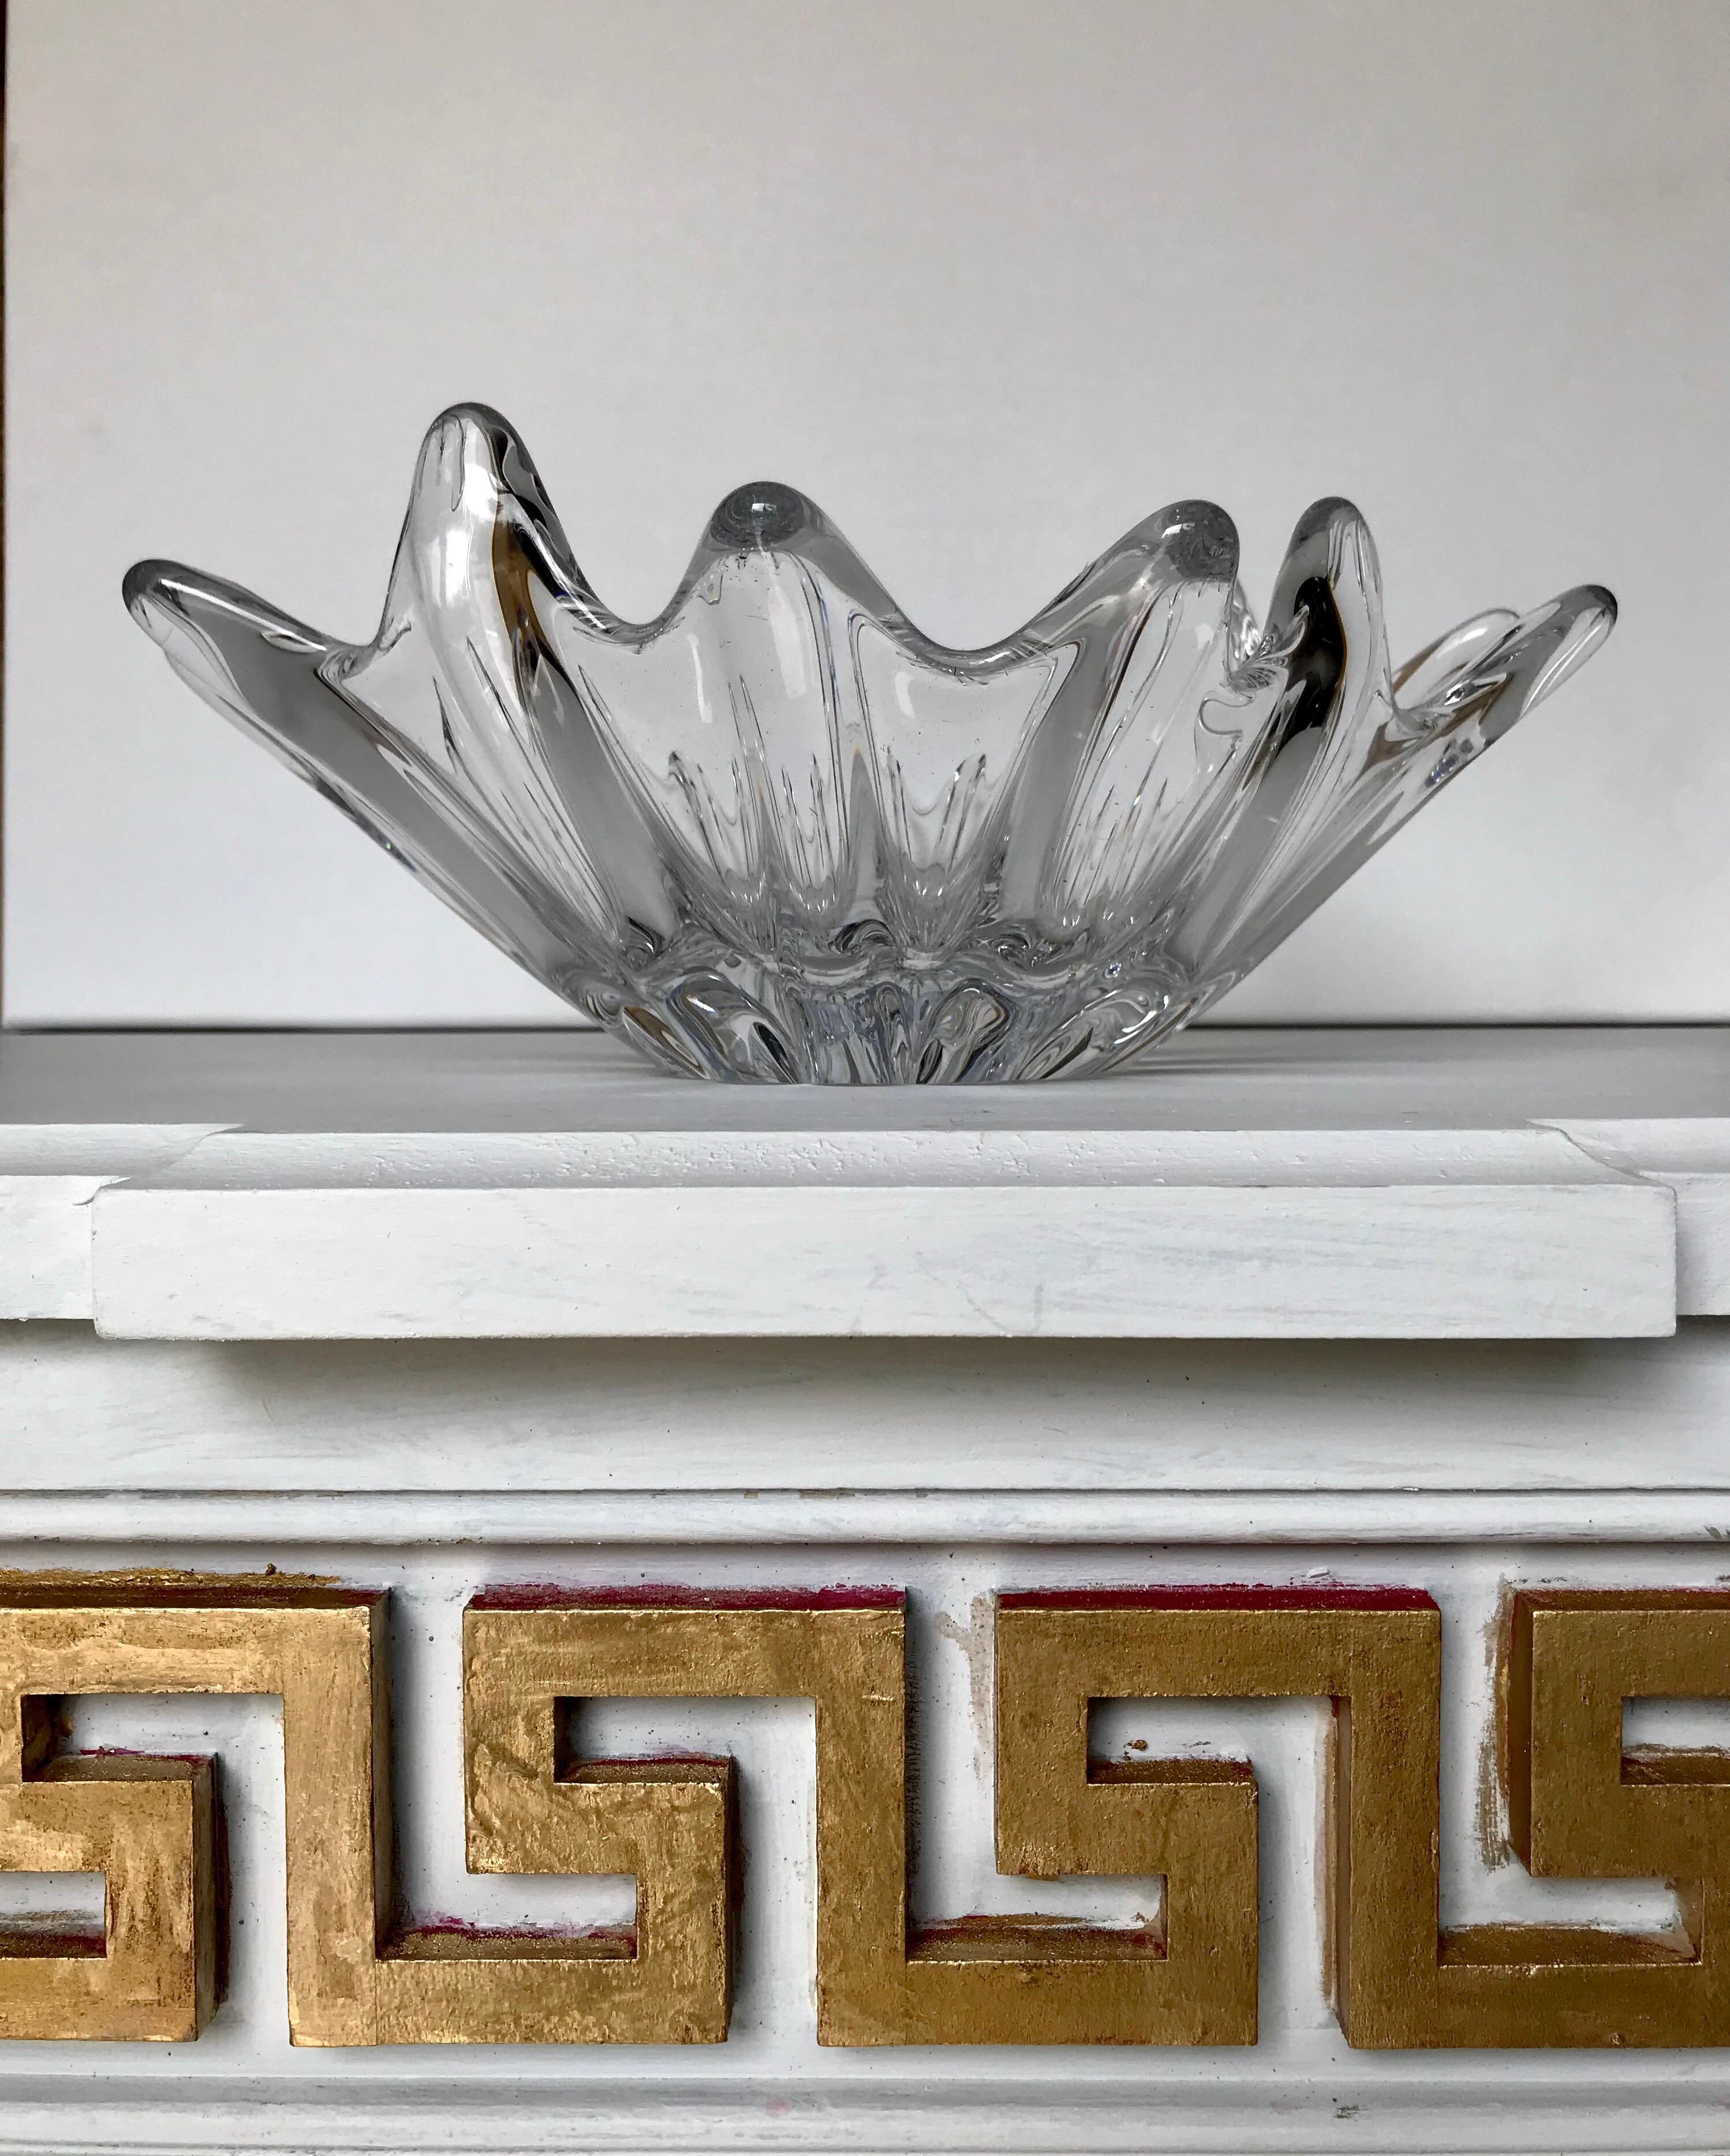 A sculptural and modern leaded glass bowl by Daum, one of the most illustrious glass makers of the 20th century in Nancy, France, circa 1950. Daum was awarded a Grand Prix during the 1900, Universal Exhibition for their exquisite glass pieces. The